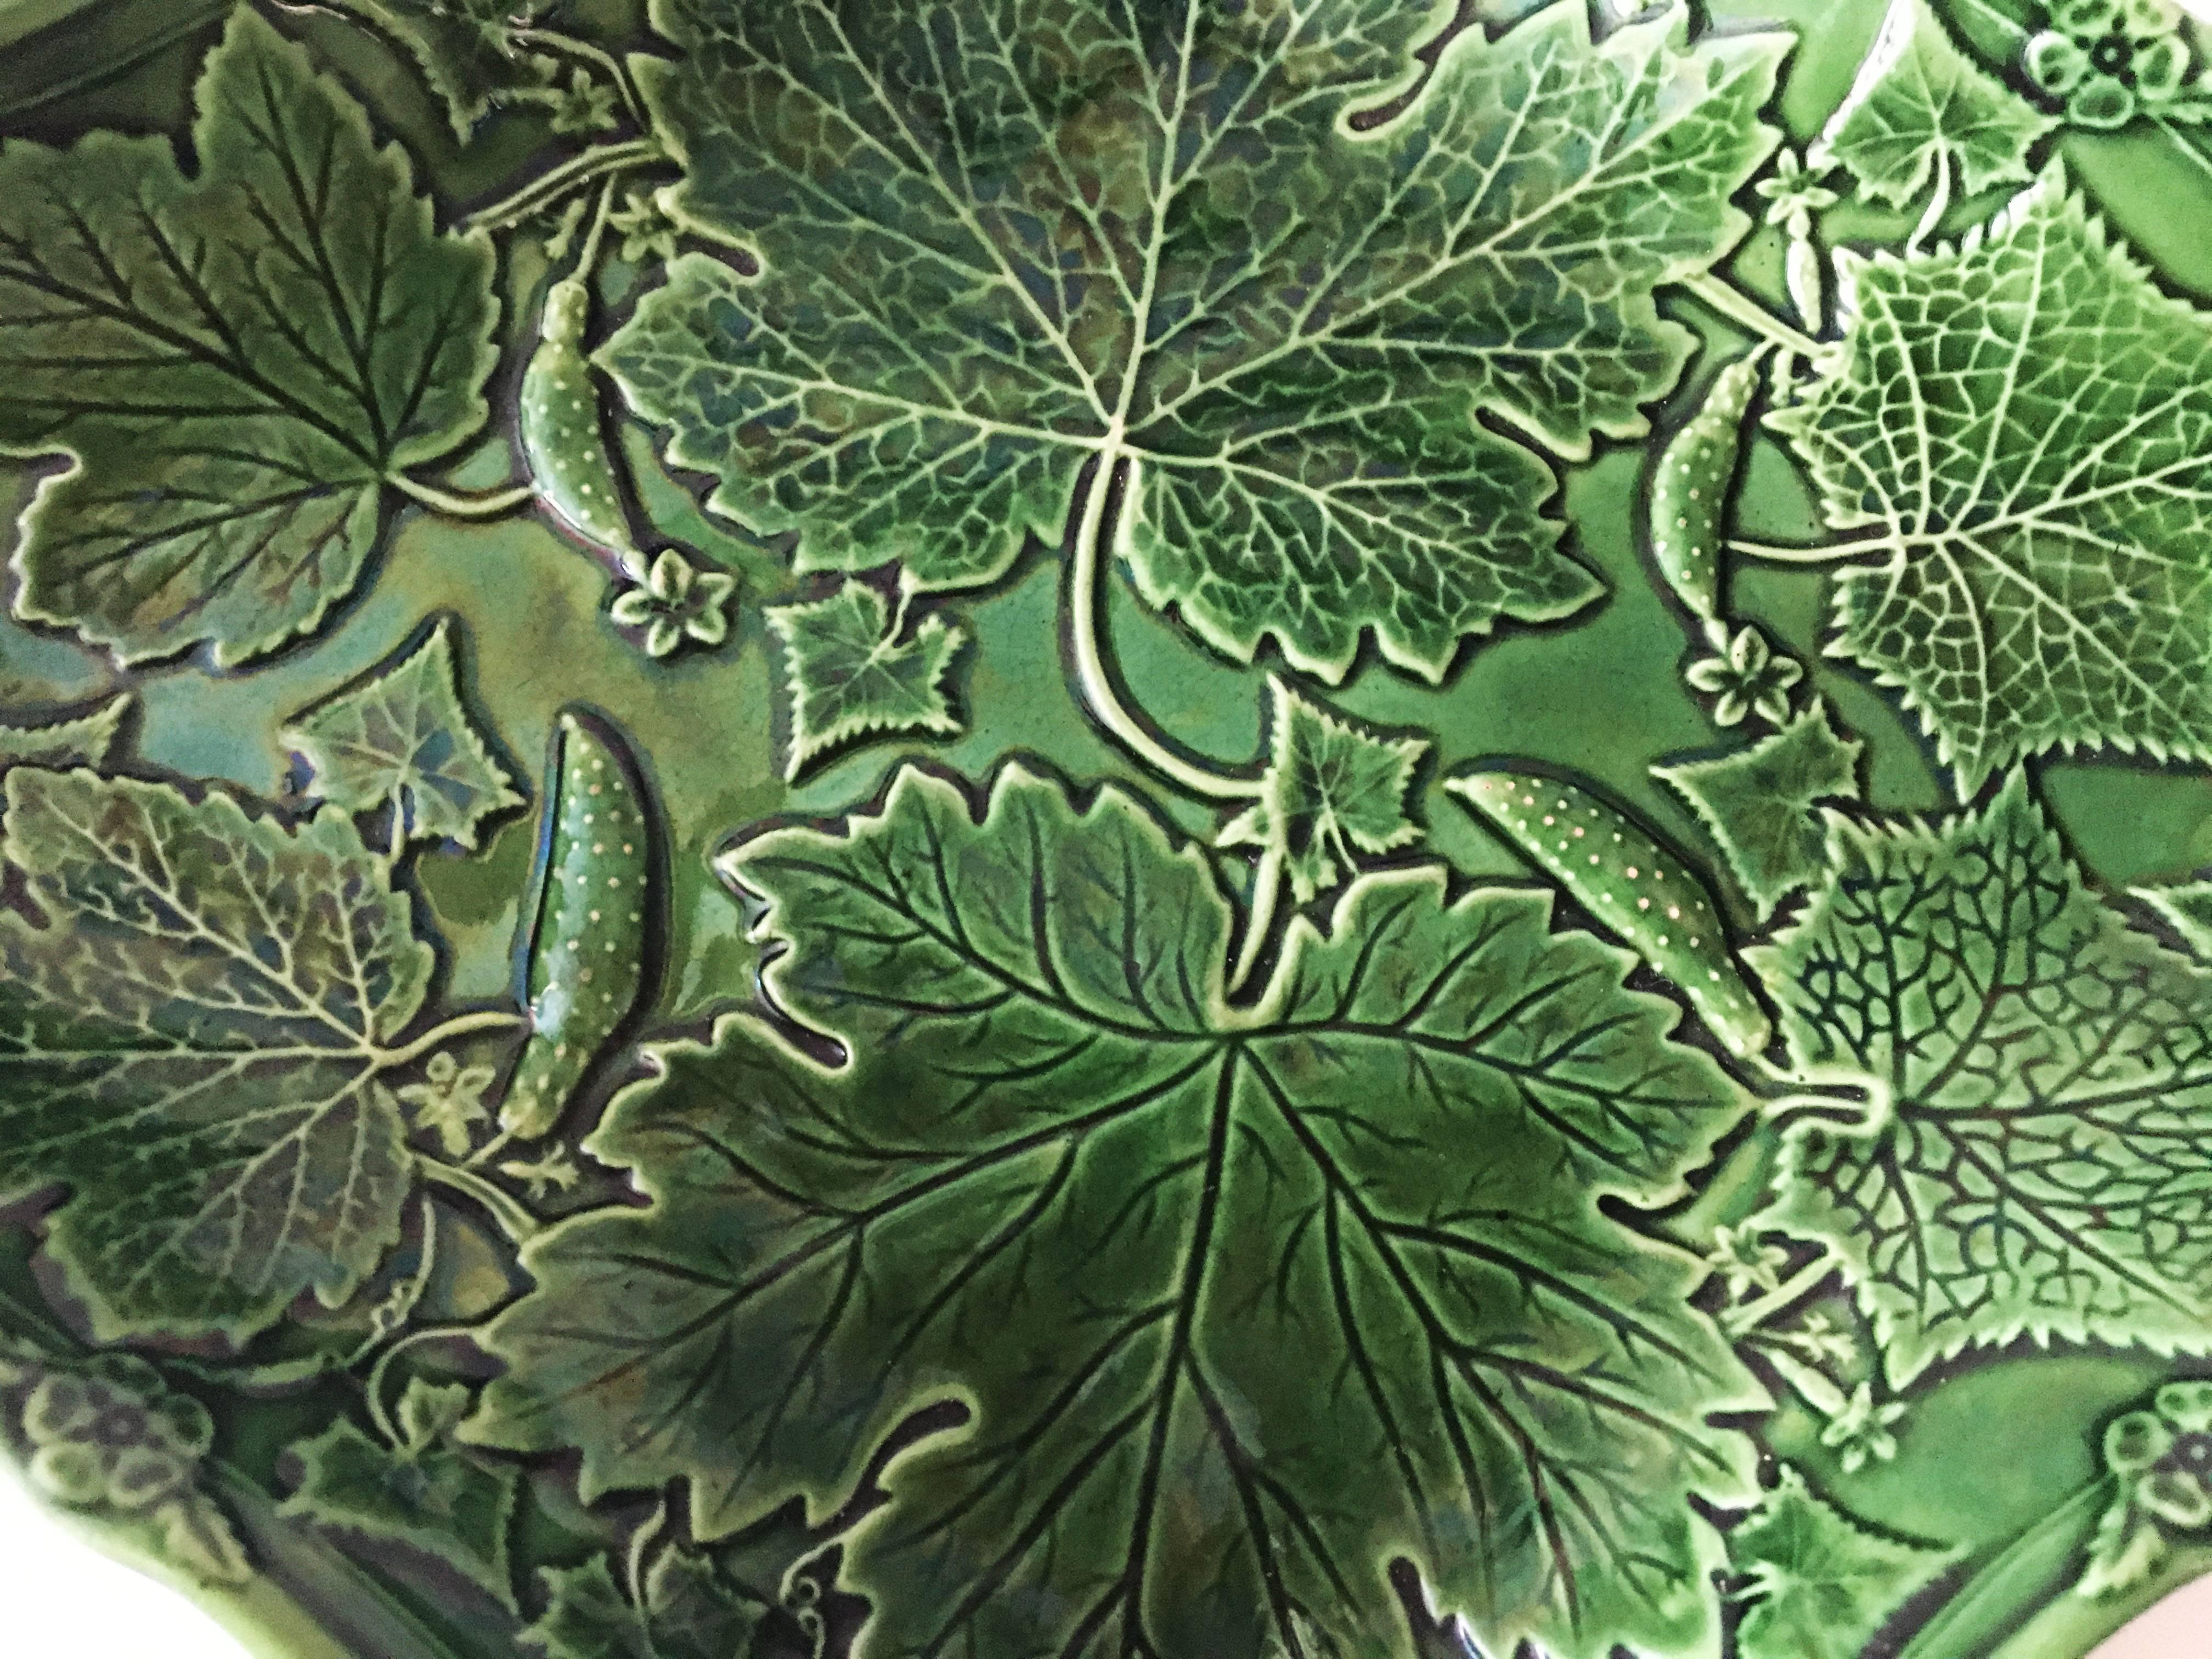 19th green English Victorian Majolica picked cucumbers platter in a losange shape.
Fine quality and details for this piece decorated with leaves of all sizes.